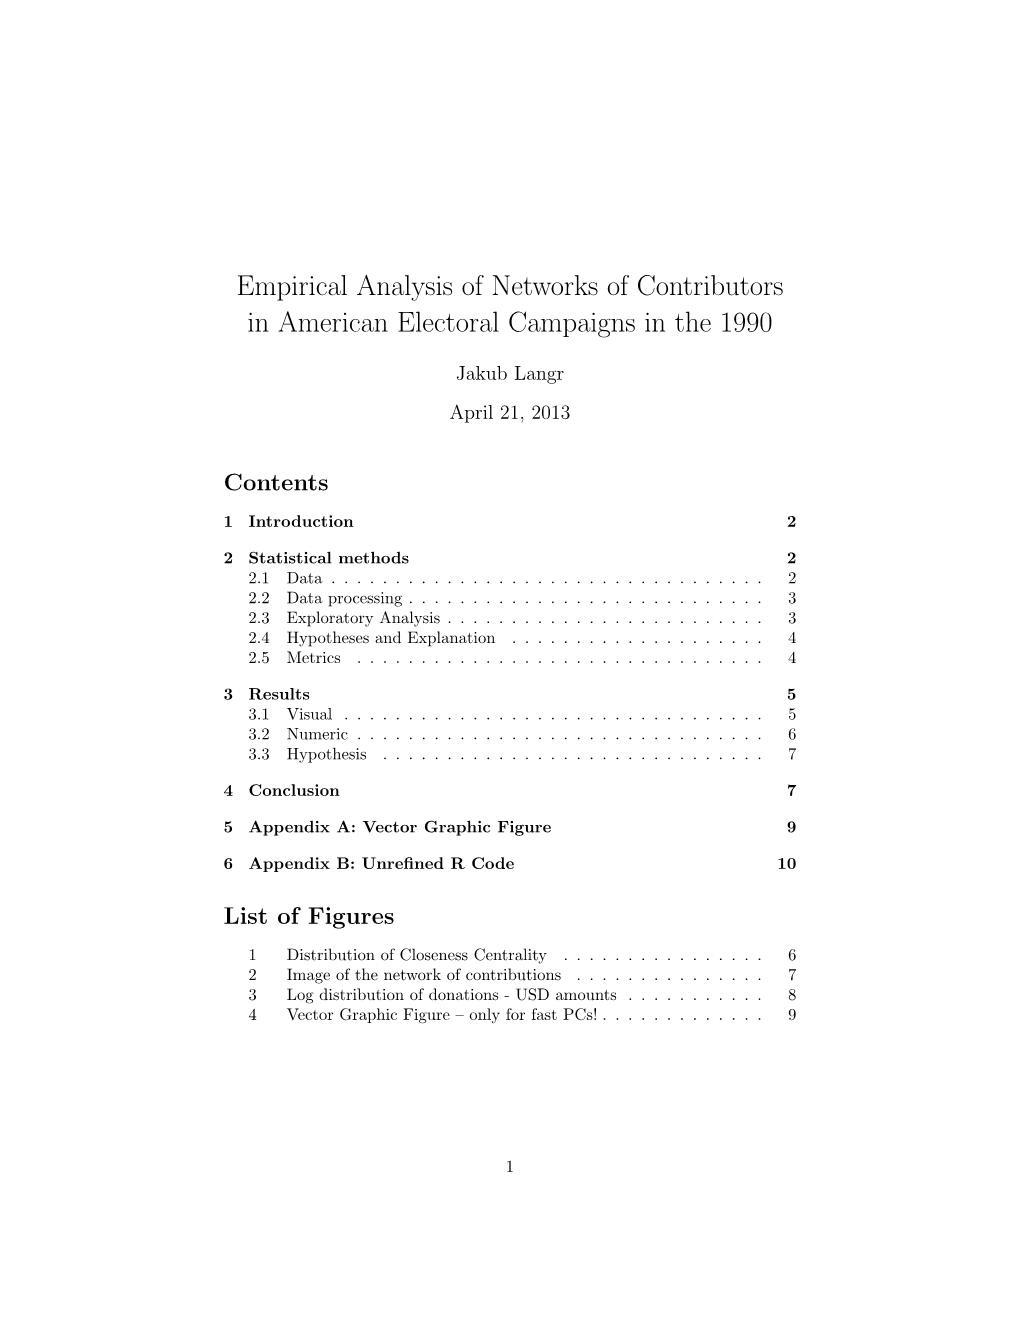 Empirical Analysis of Networks of Contributors in American Electoral Campaigns in the 1990